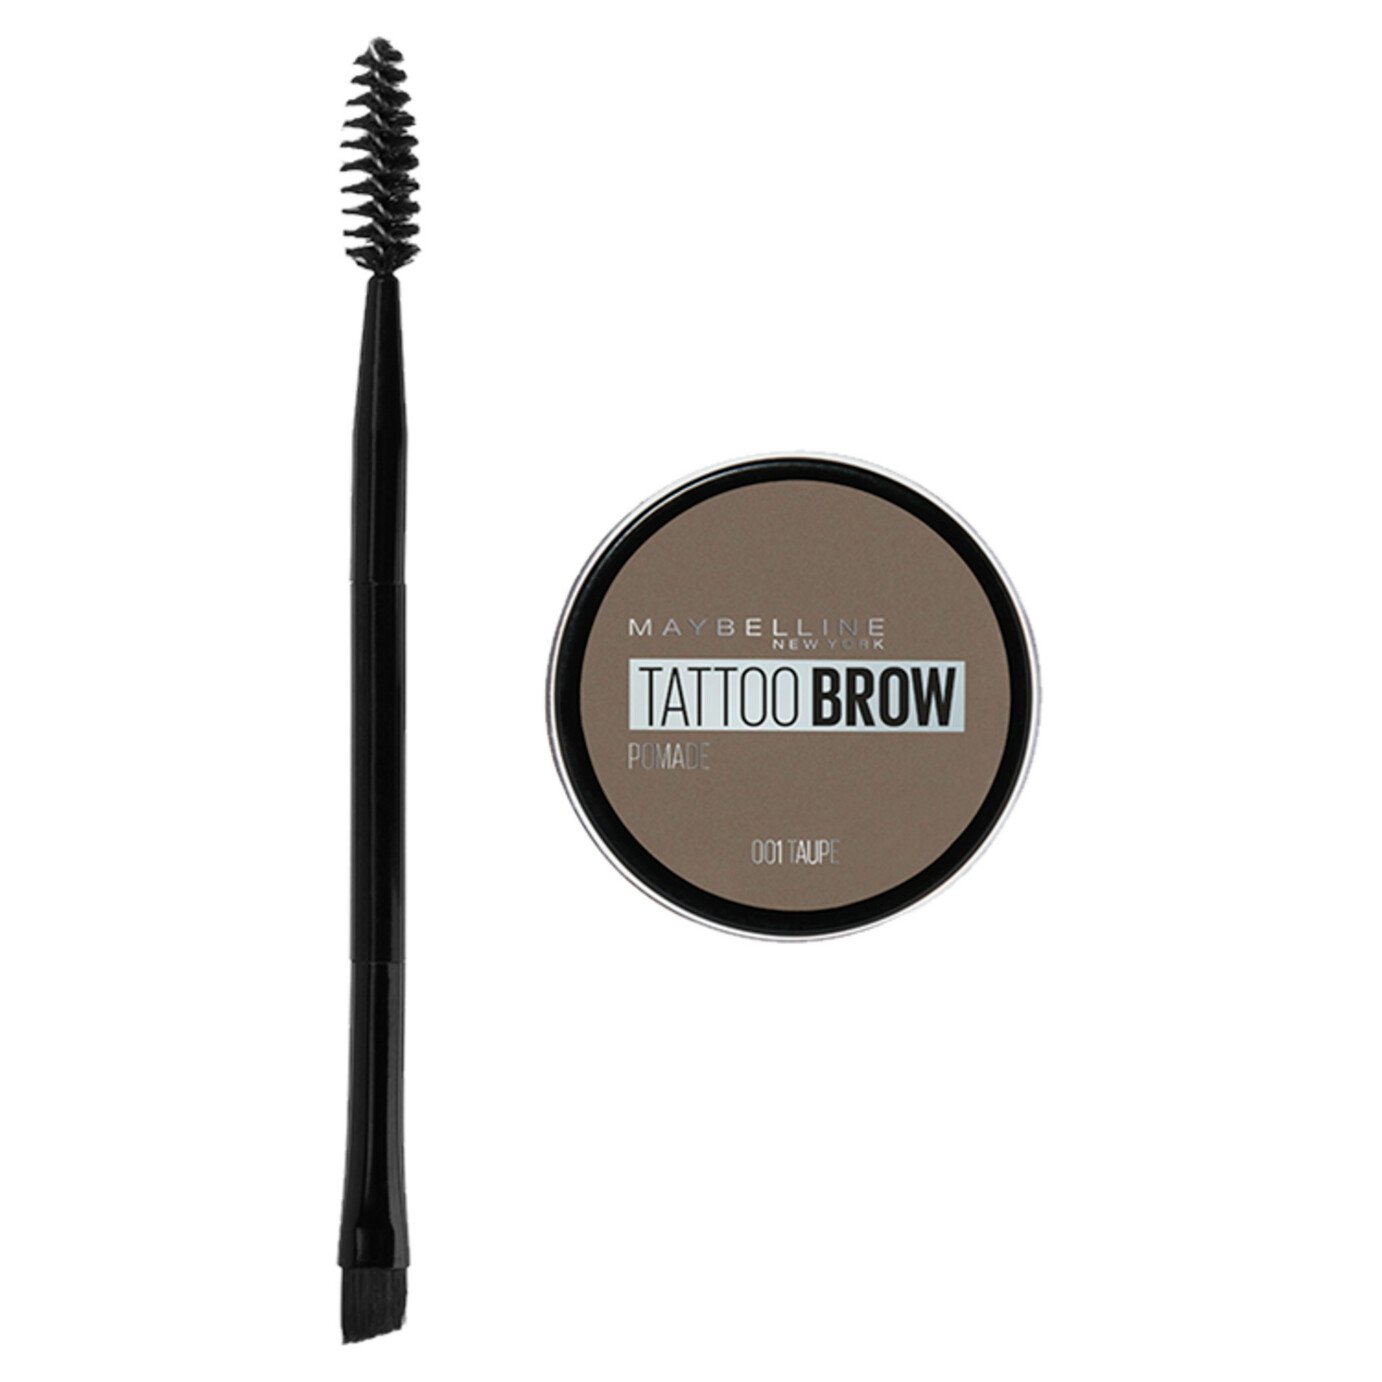 Maybelline Tattoo Brow Pomade - 01 Taupe